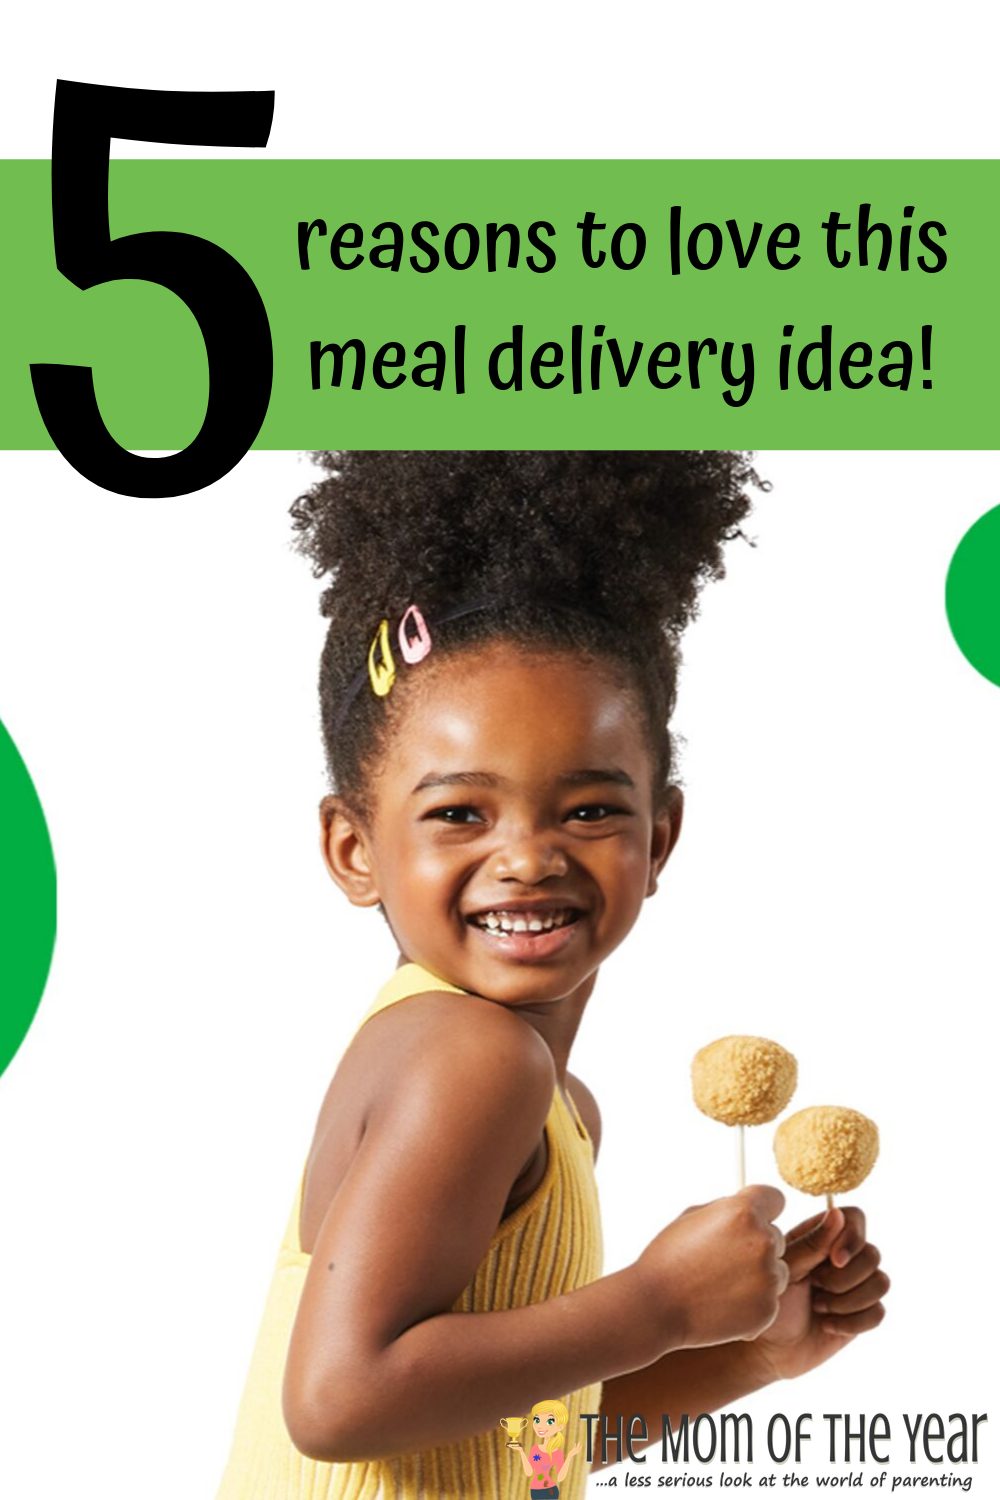 Looking for a kids meal delivery service that will make your life easier? Yumble is your sweet solution you'll love! Mealtime with kids has never been easier!